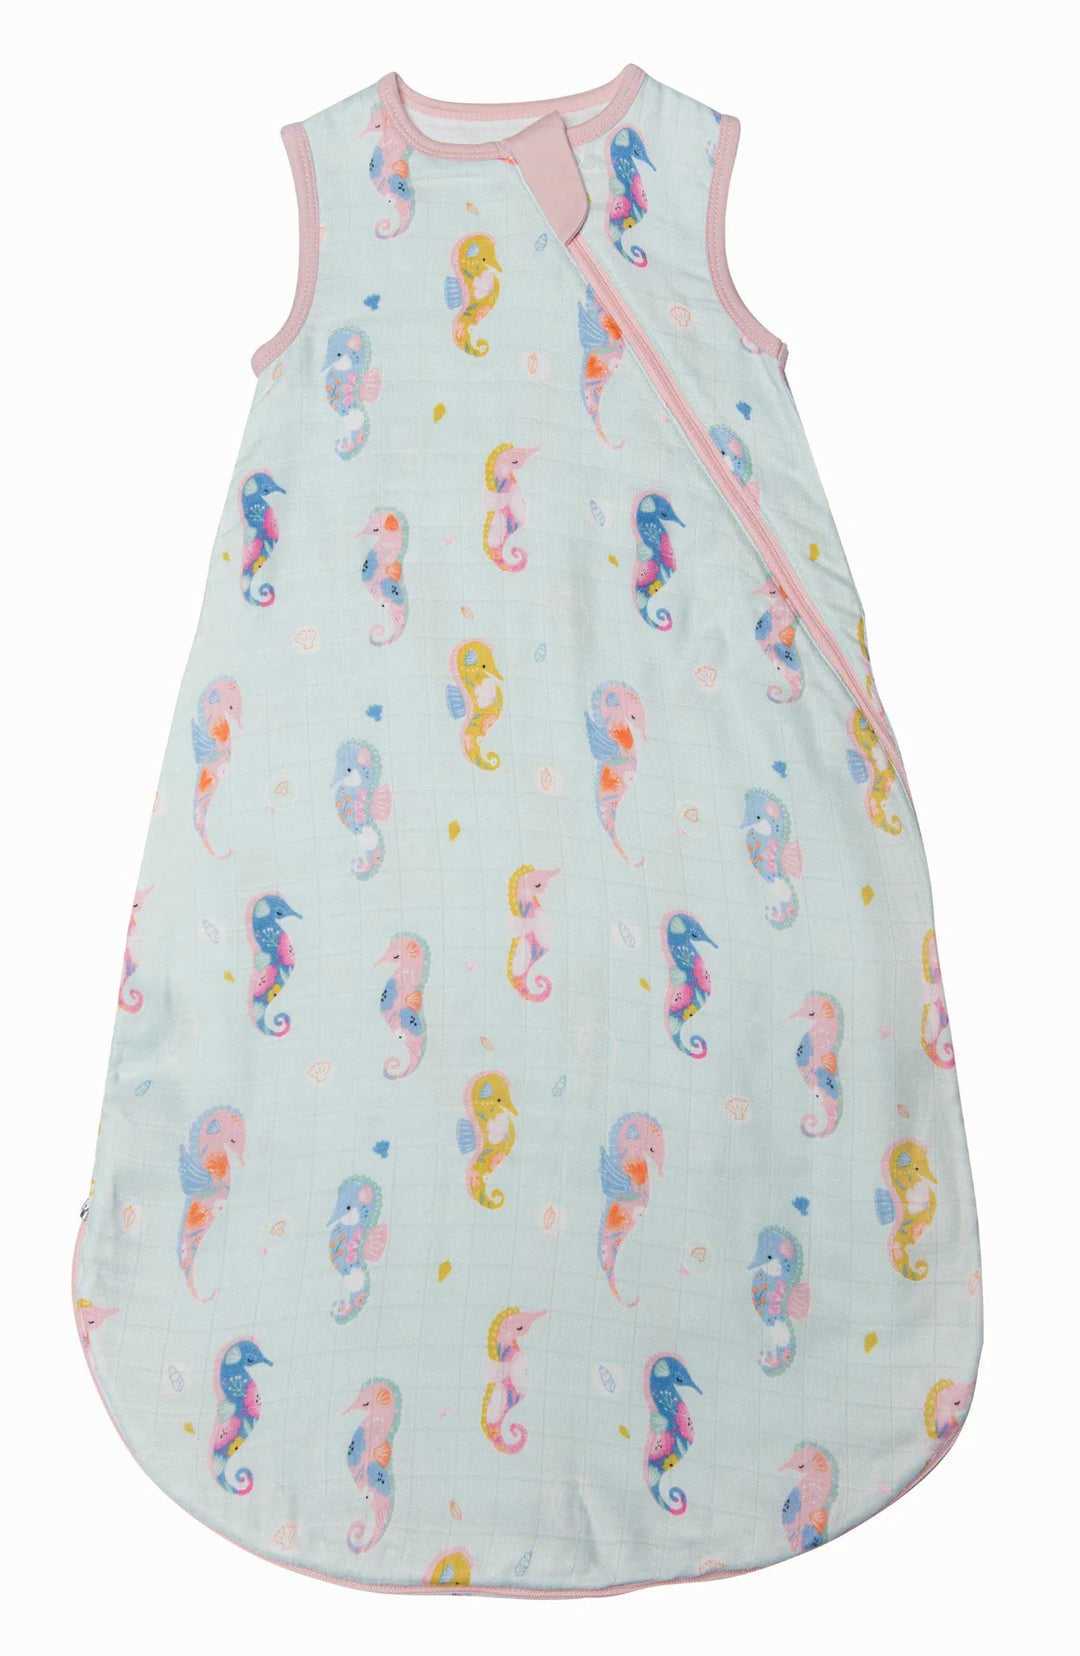 Painterly Seahorse Sleeping Bag by Loulou Lollipop